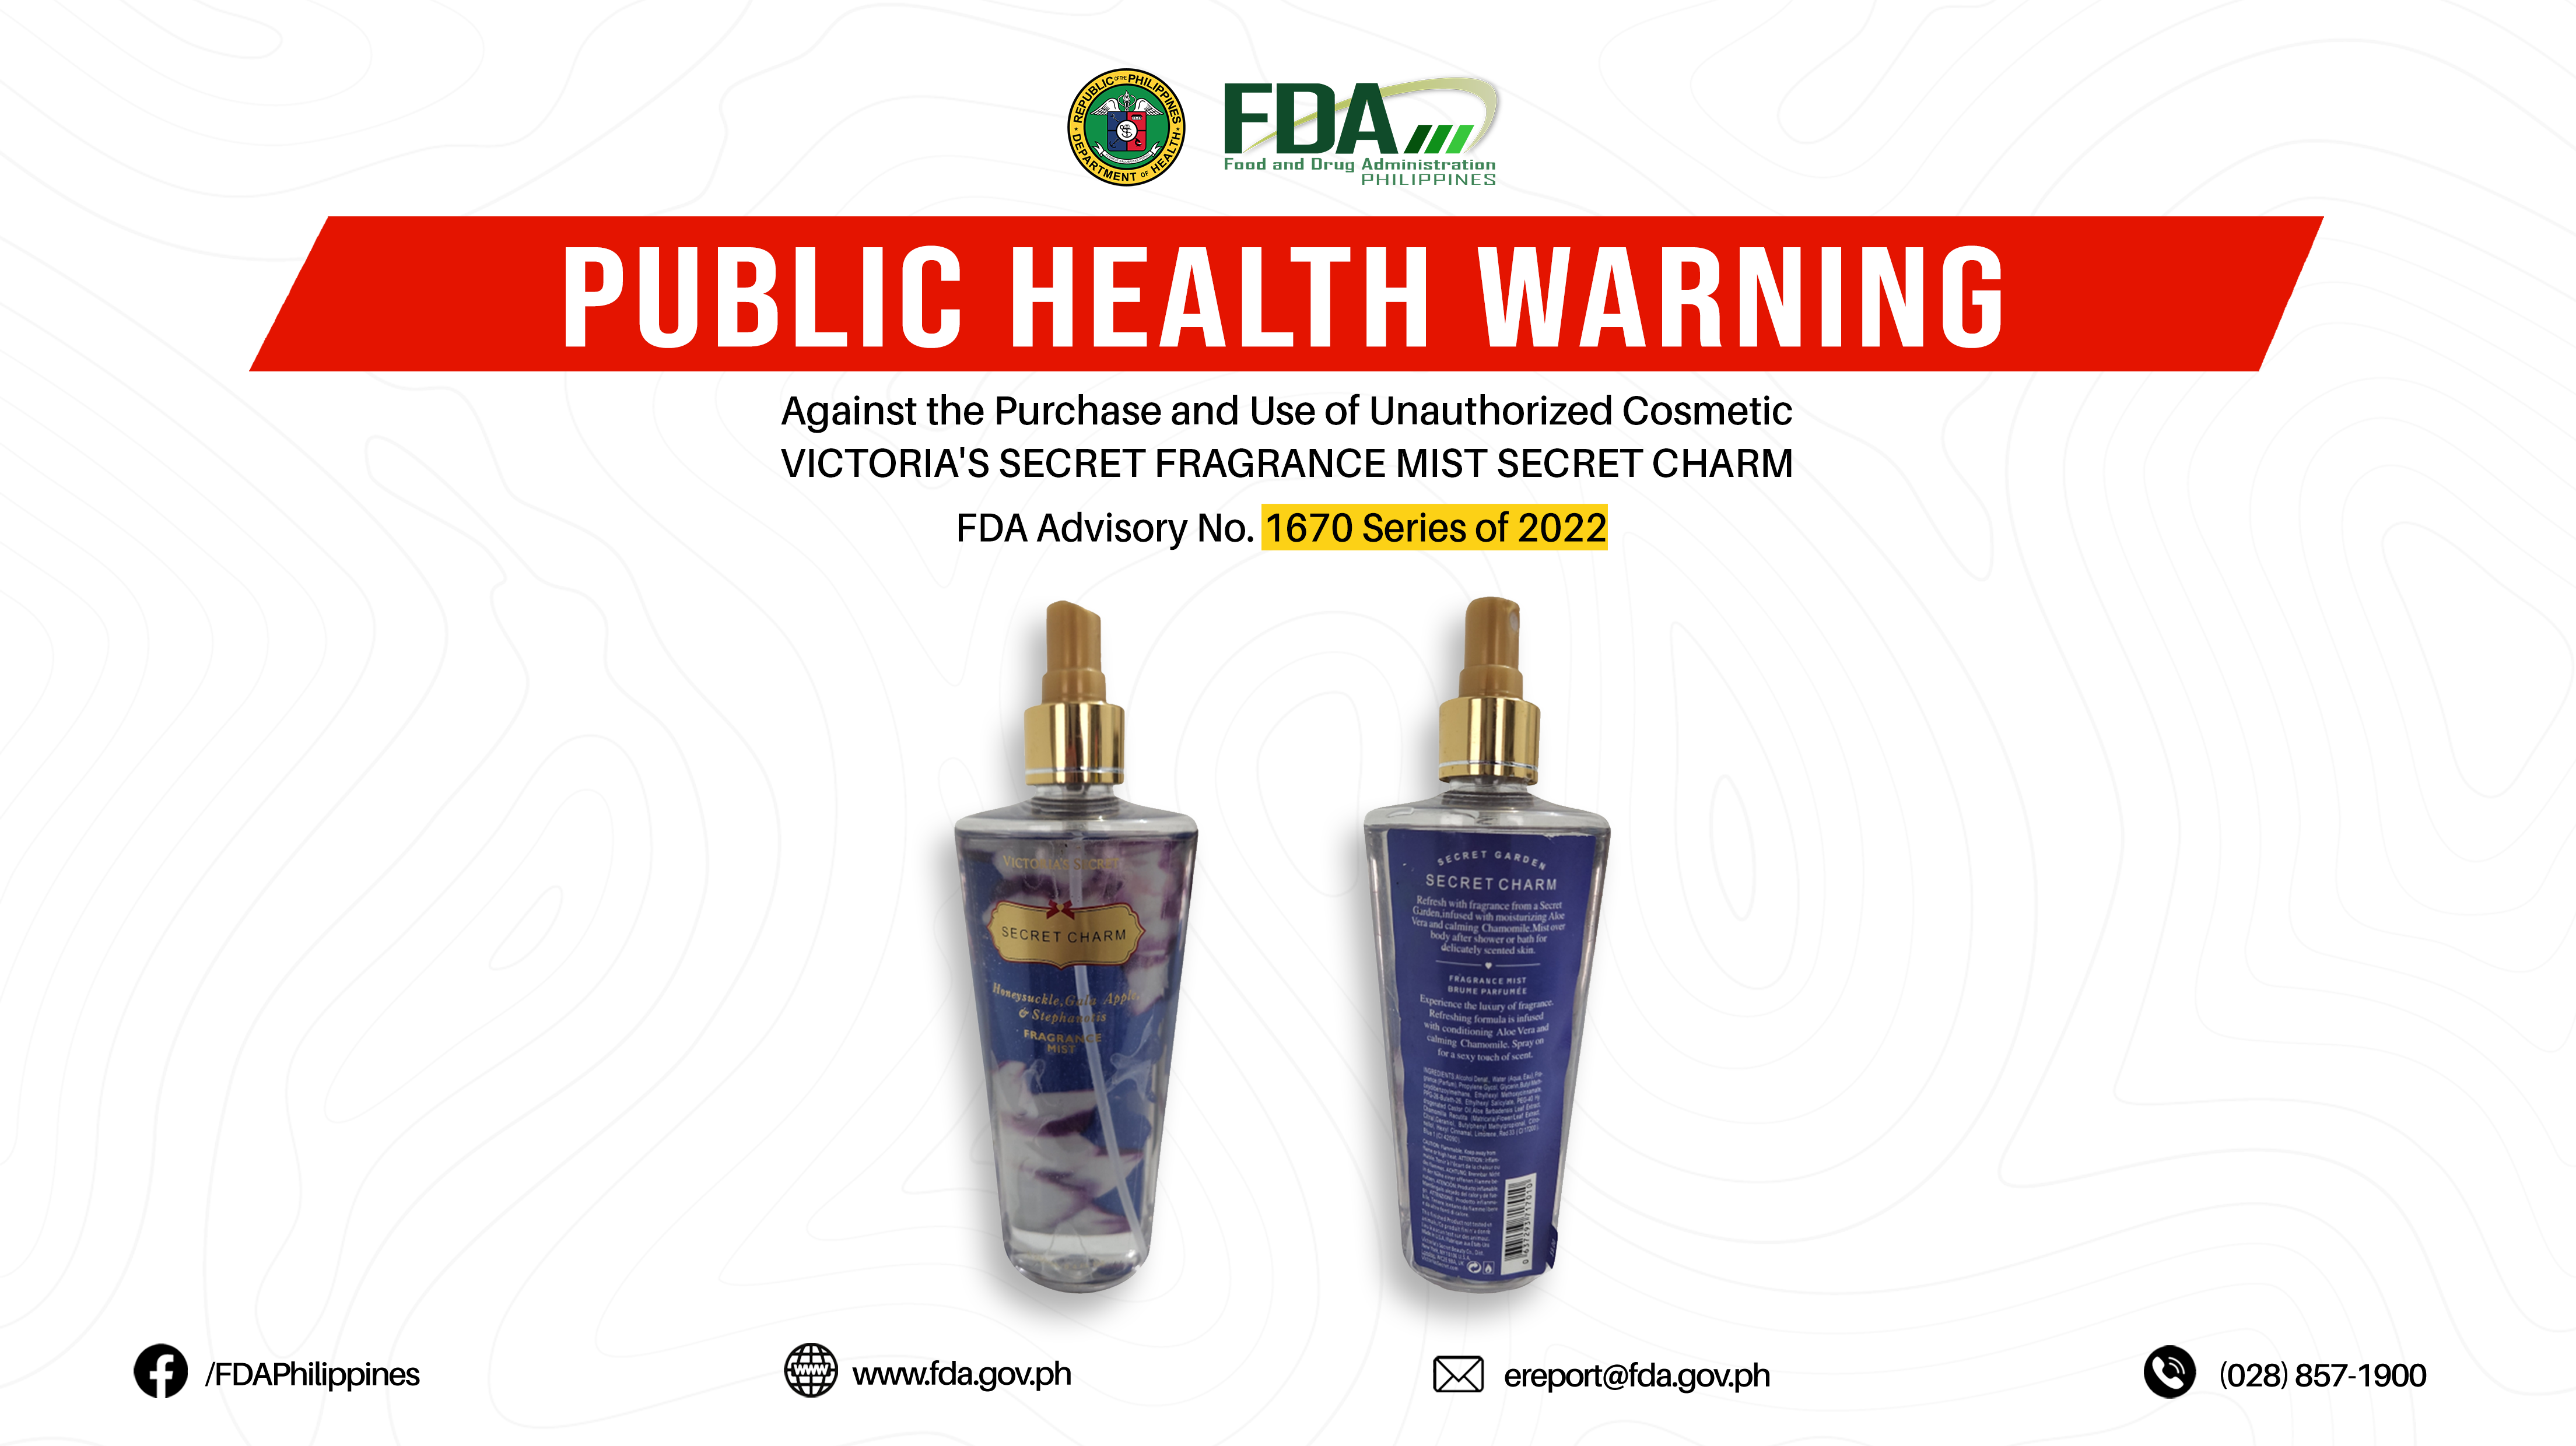 FDA Advisory No.2022-1670 || Public Health Warning Against the Purchase and Use of Unauthorized Cosmetic VICTORIA’S SECRET FRAGRANCE MIST SECRET CHARM